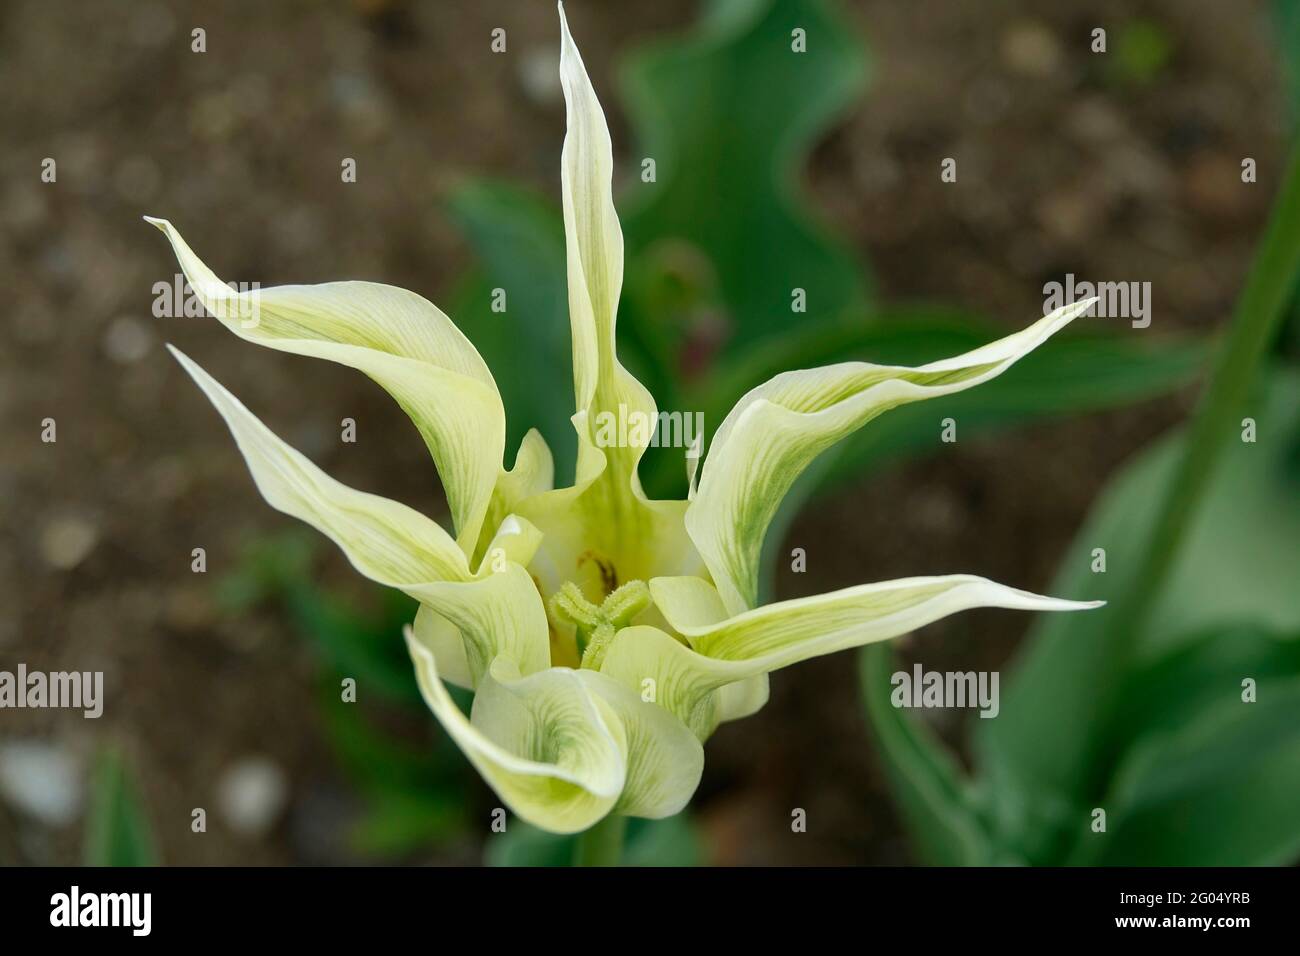 Lily Flowering Spring Green Tulip with Ivory White Petals Pointing Outward Stock Photo